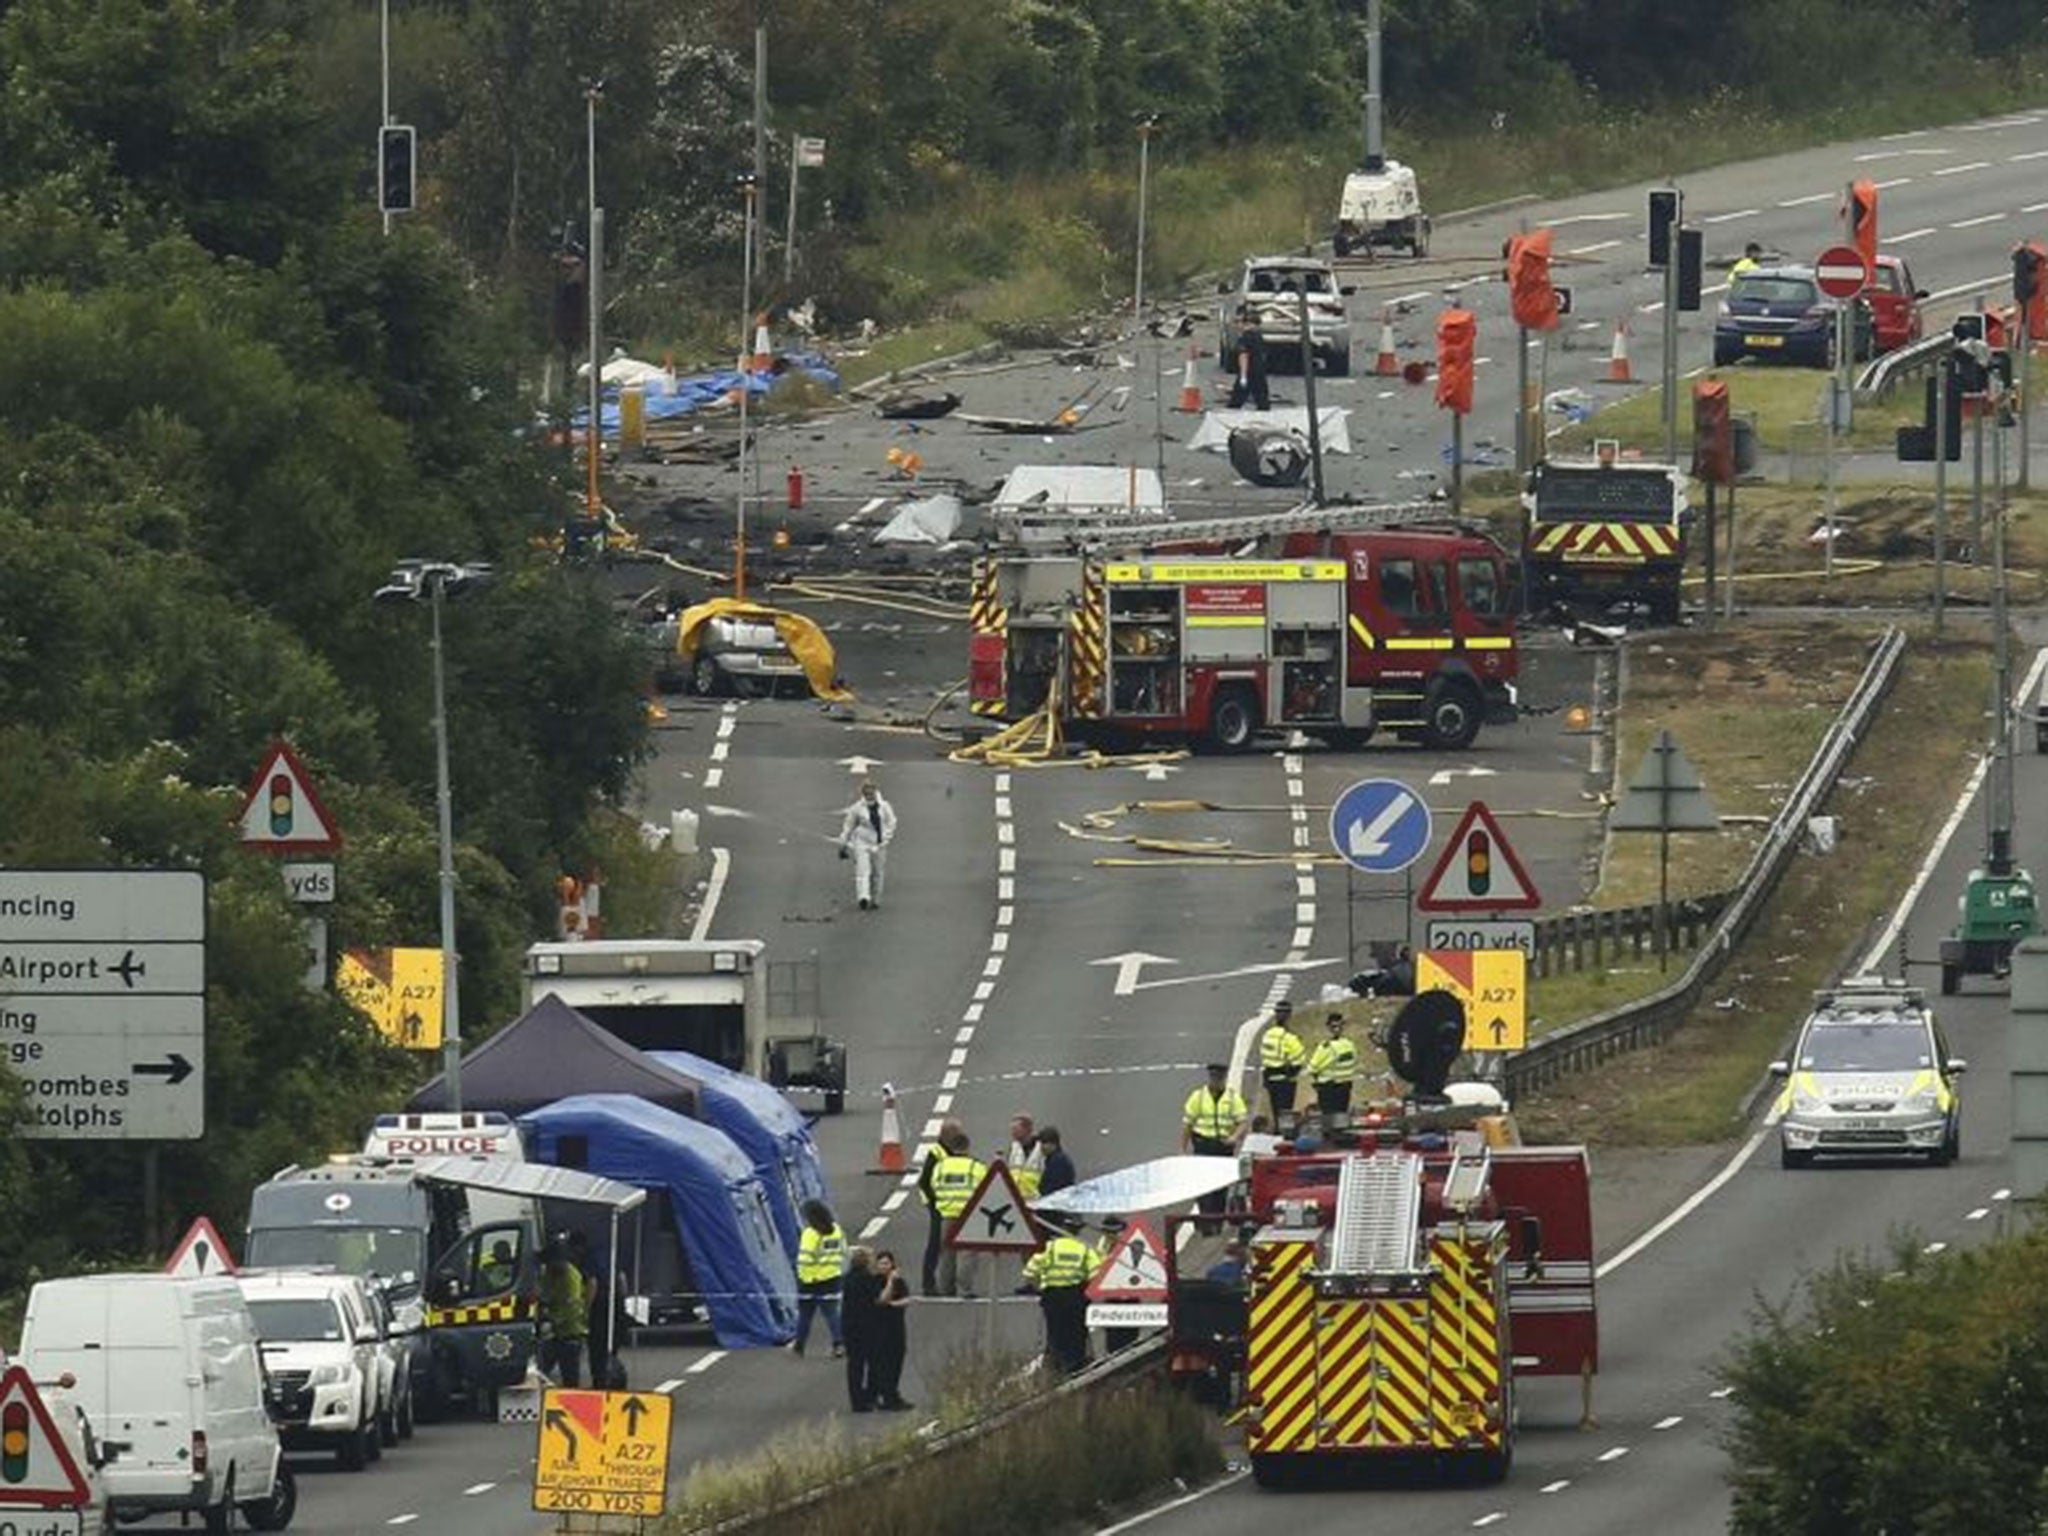 Emergency services and crash investigation officers work at the site where a Hawker Hunter fighter jet crashed onto the A27 road at Shoreham near Brighton